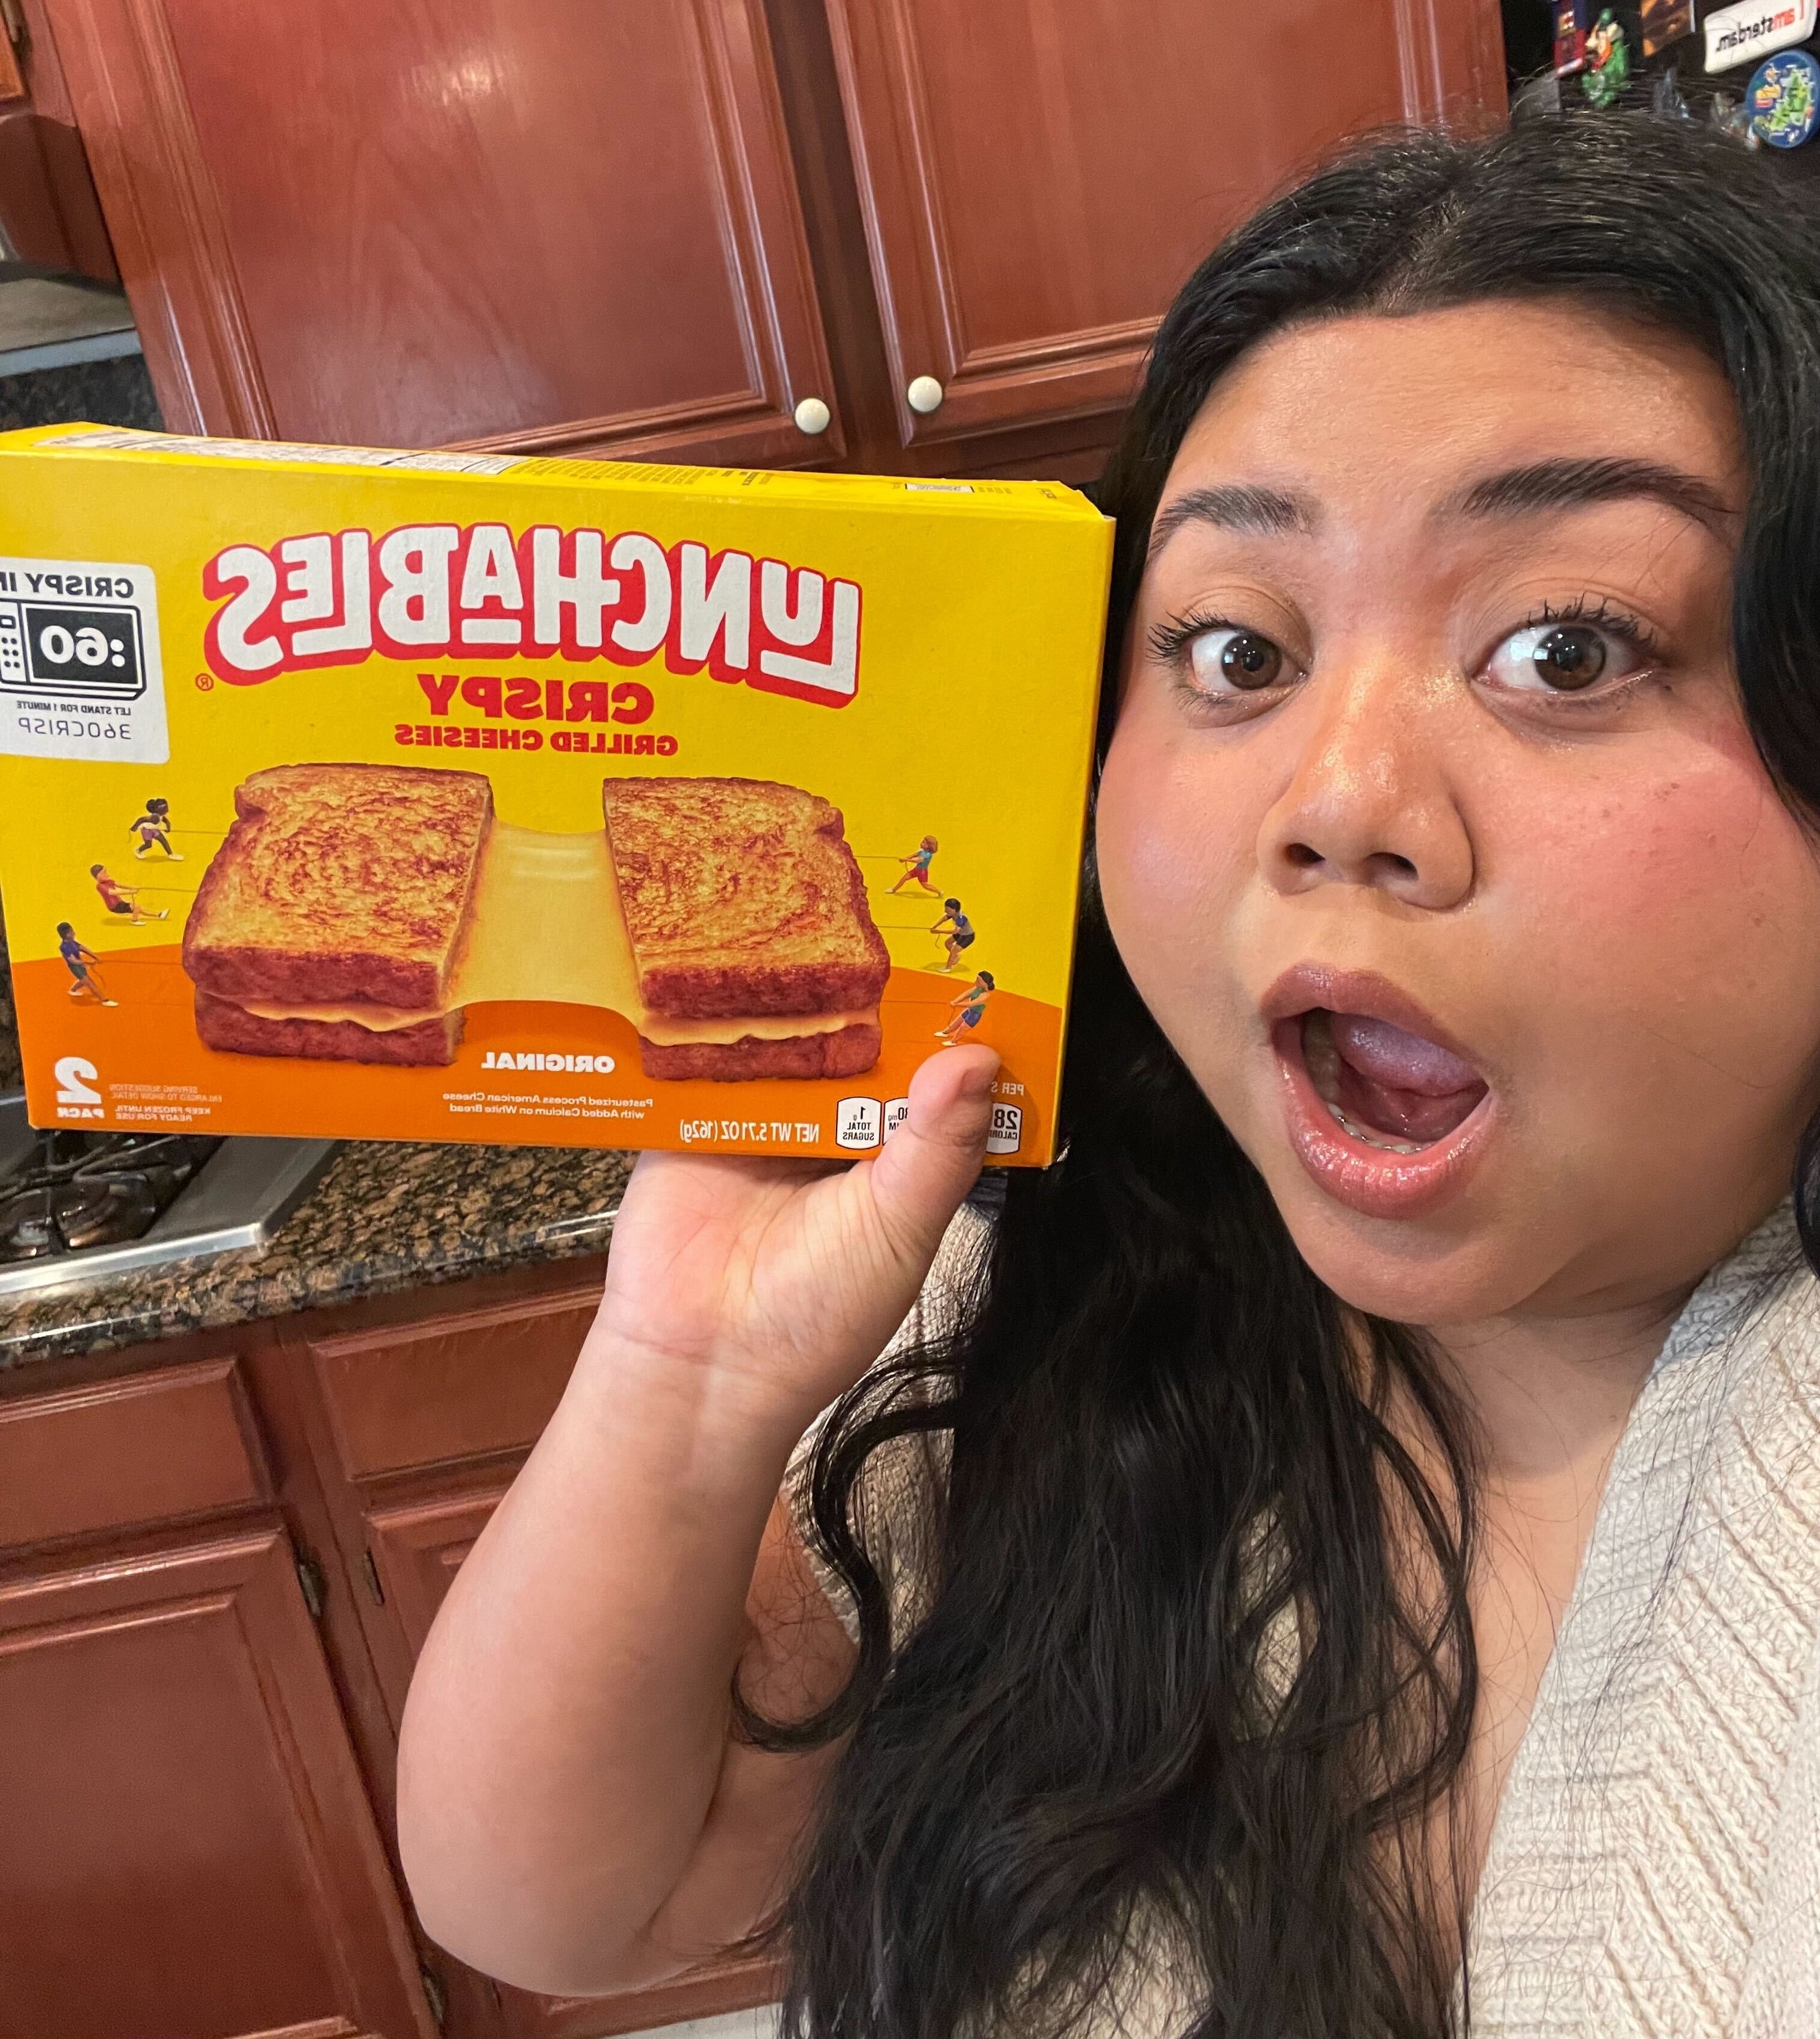 The author is holding a box of Lunchables Grilled Cheesies with a surprised expression